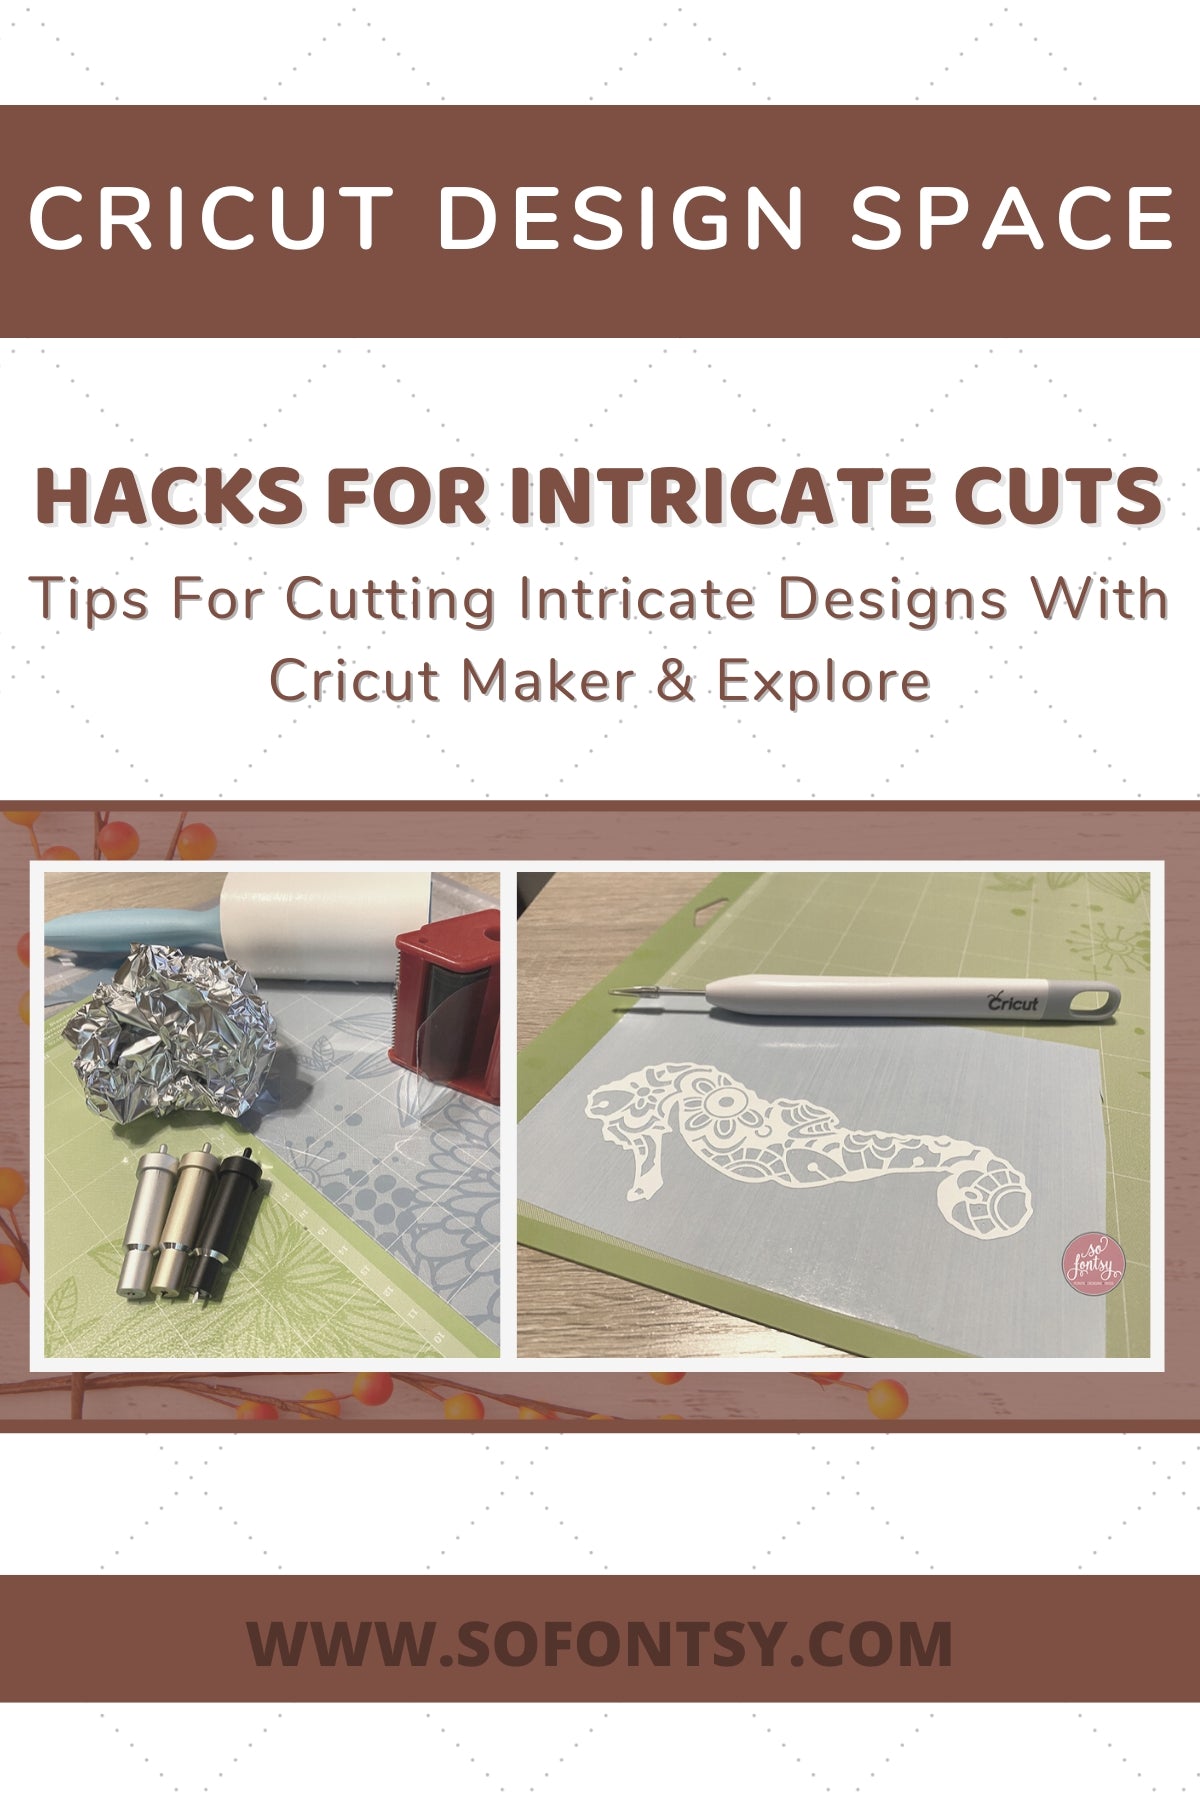 Download Tips For Cutting Intricate Designs With Cricut Maker Explore So Fontsy